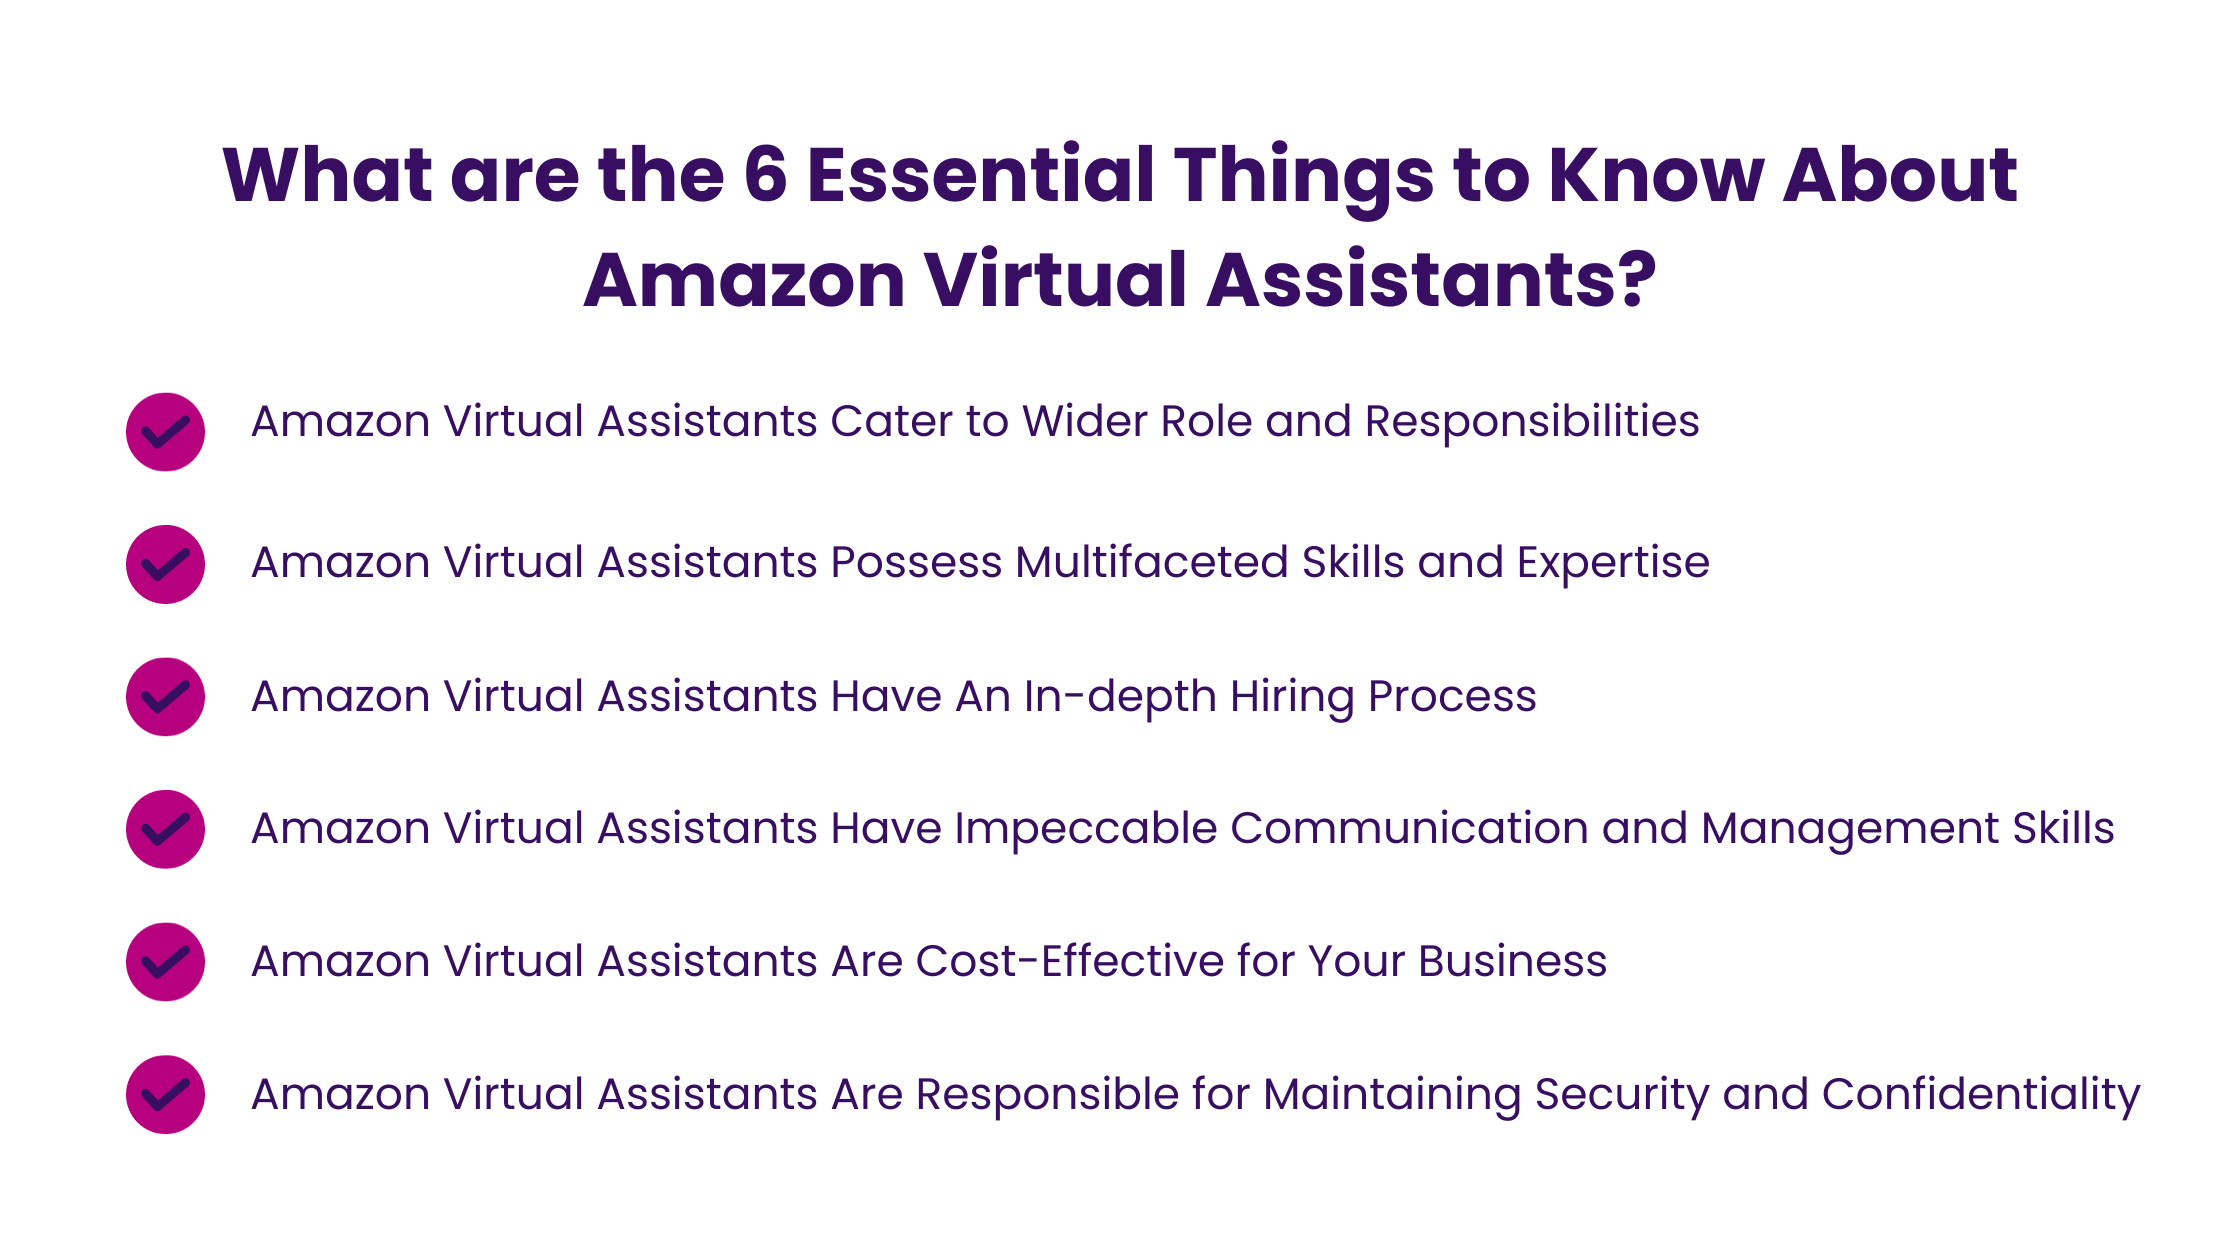 What are the 6 Essential Things to Know About Amazon Virtual Assistants